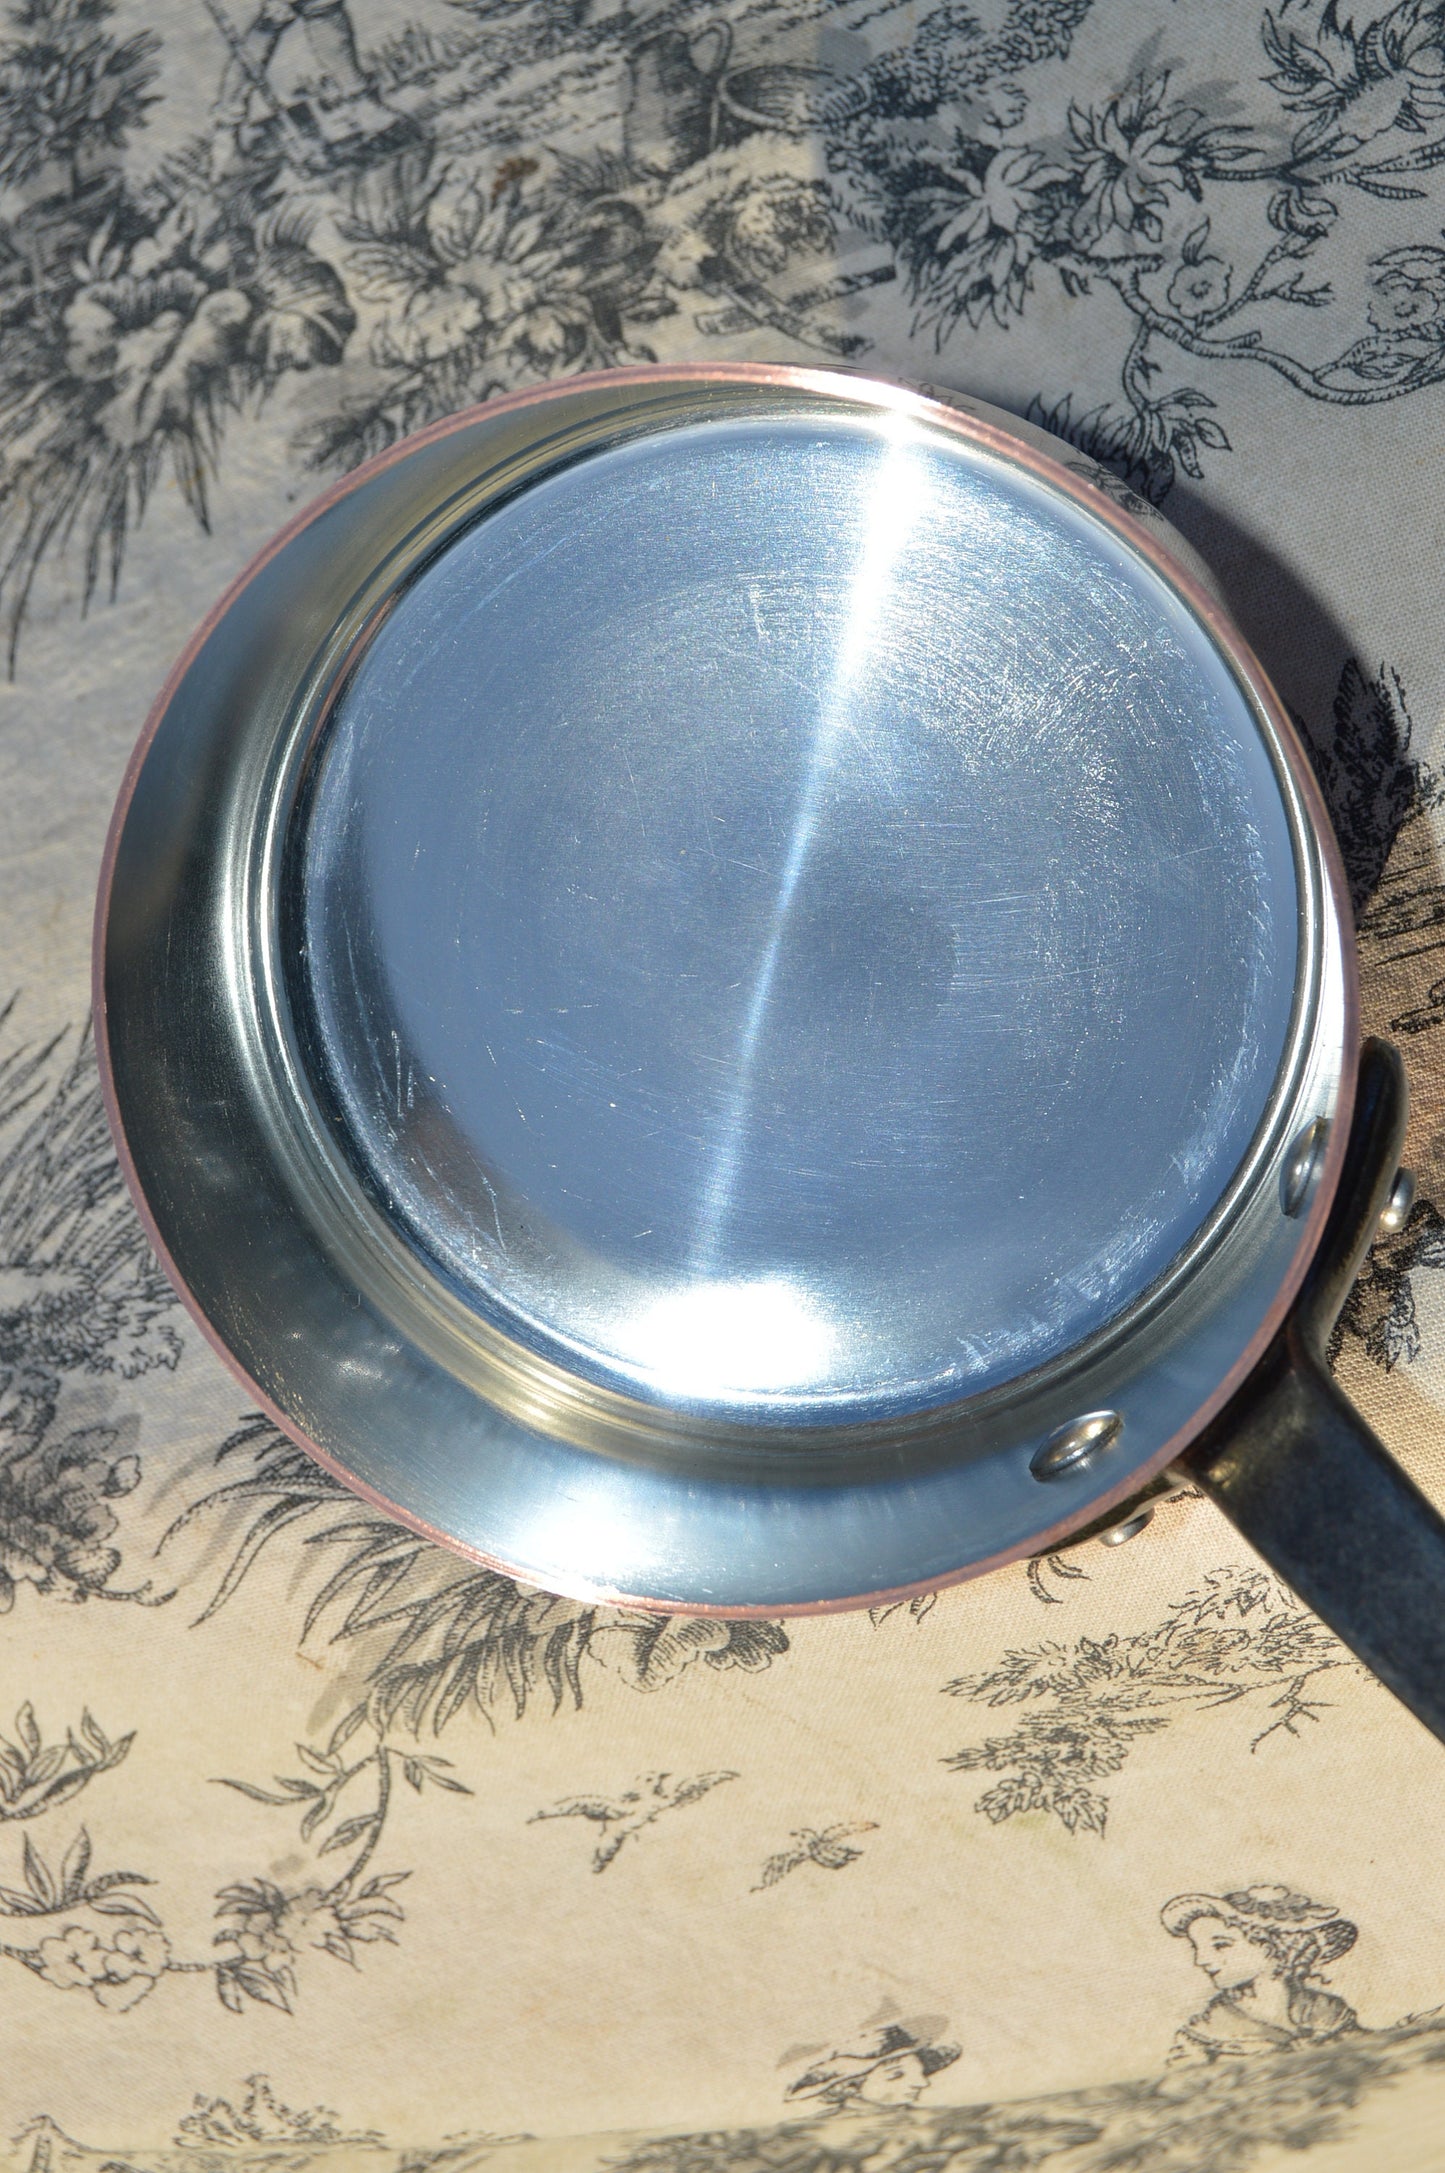 New 12cm NKC Copper Pan Tin Lined 1.4mm Professional Normandy Kitchen Copper Pot Iron Handle Steel Rivet Made in France 12cm 4 3/4" Saucepan